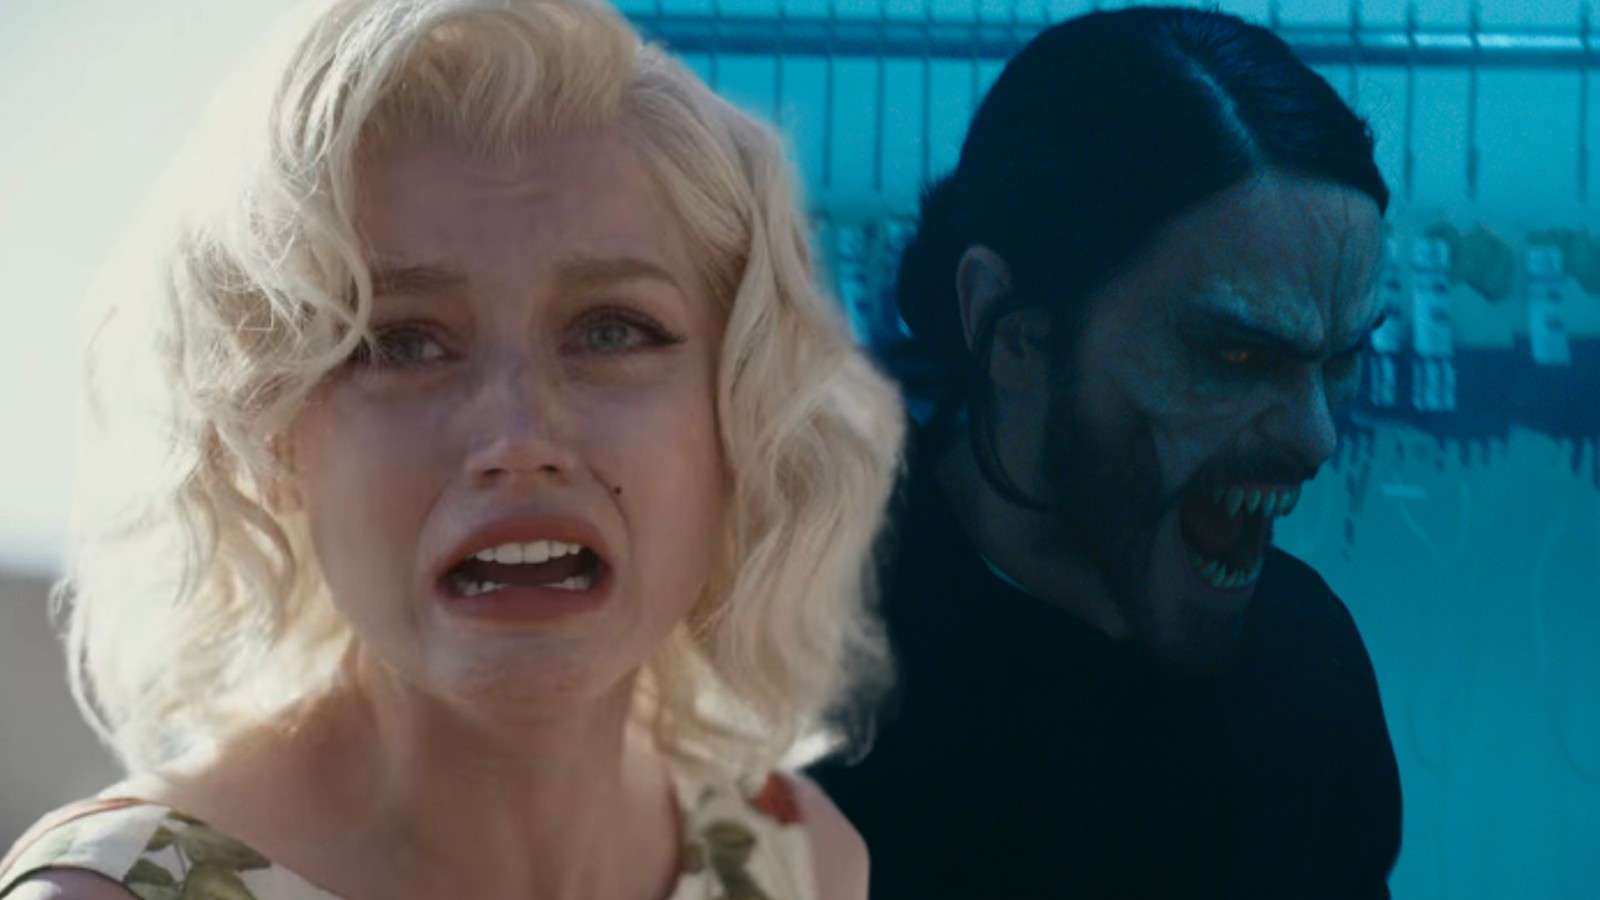 Ana de Armas in Blonde and Jared Leto in Morbius, two movies nominated for multiple Razzies